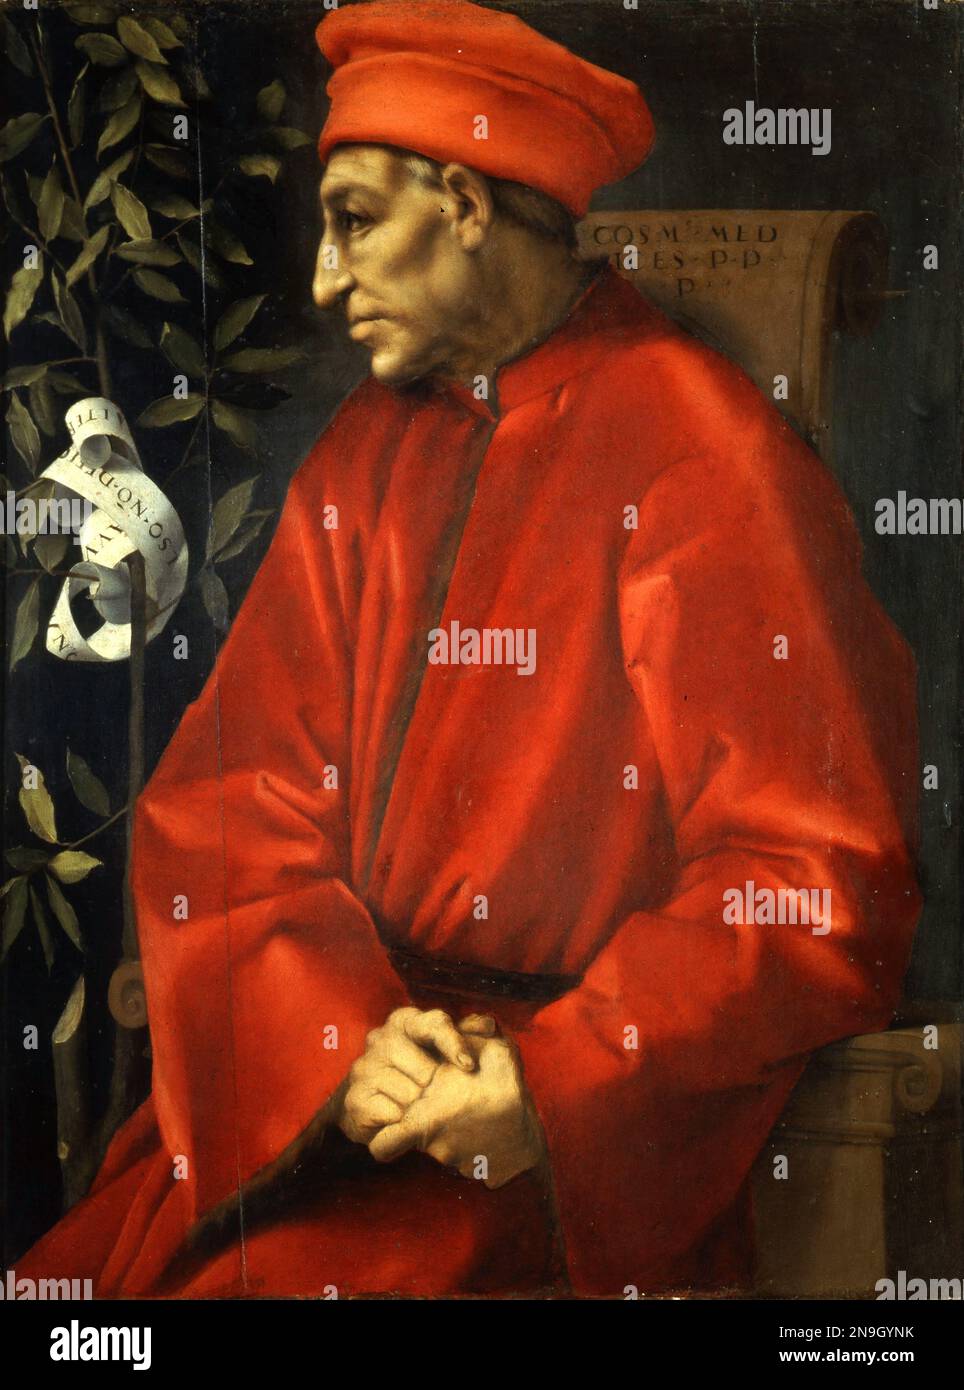 Cosimo di Giovanni de' Medici (1389 – 1464) Italian banker and politician who established the Medici family as effective rulers of Florence during much of the Italian Renaissance. Portrait by Jacopo Pontormo Stock Photo